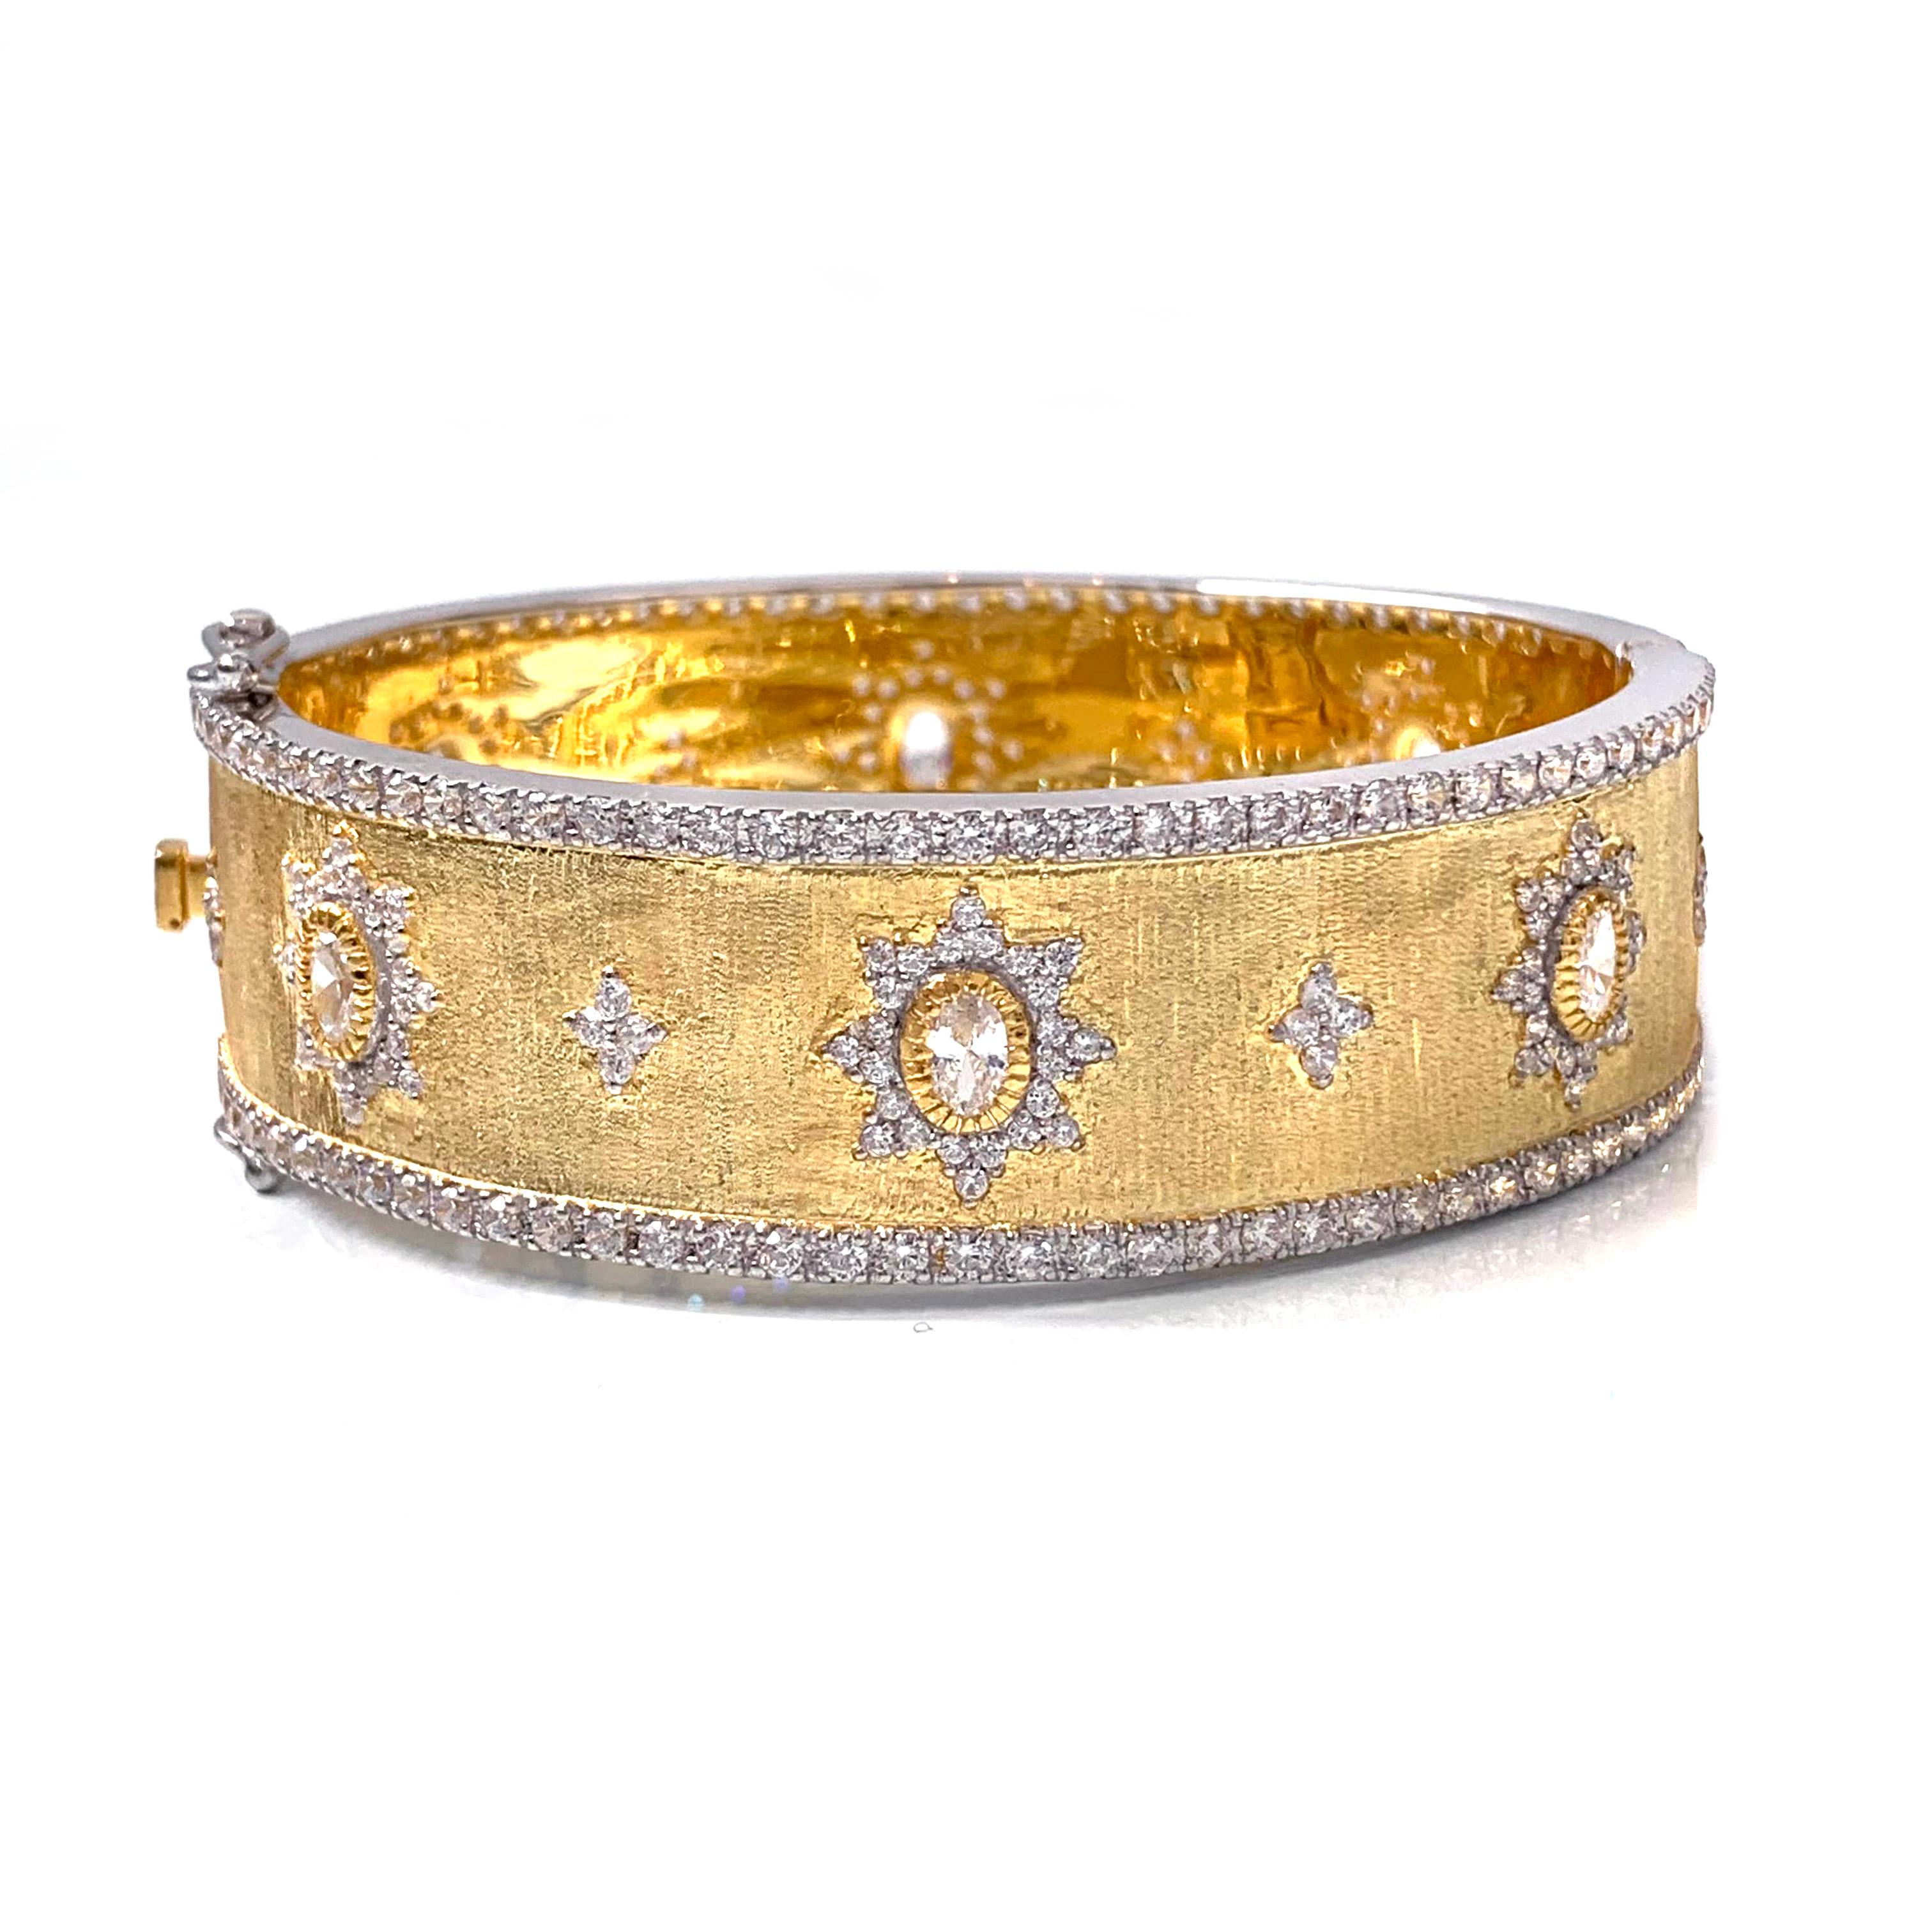 Bijoux Num hand-engraved star pattern vermeil bangle bracelet. 

This beautiful bracelet features over 340 pcs of oval and round faux diamond cubic zirconia (CZ), handcrafted Italian 